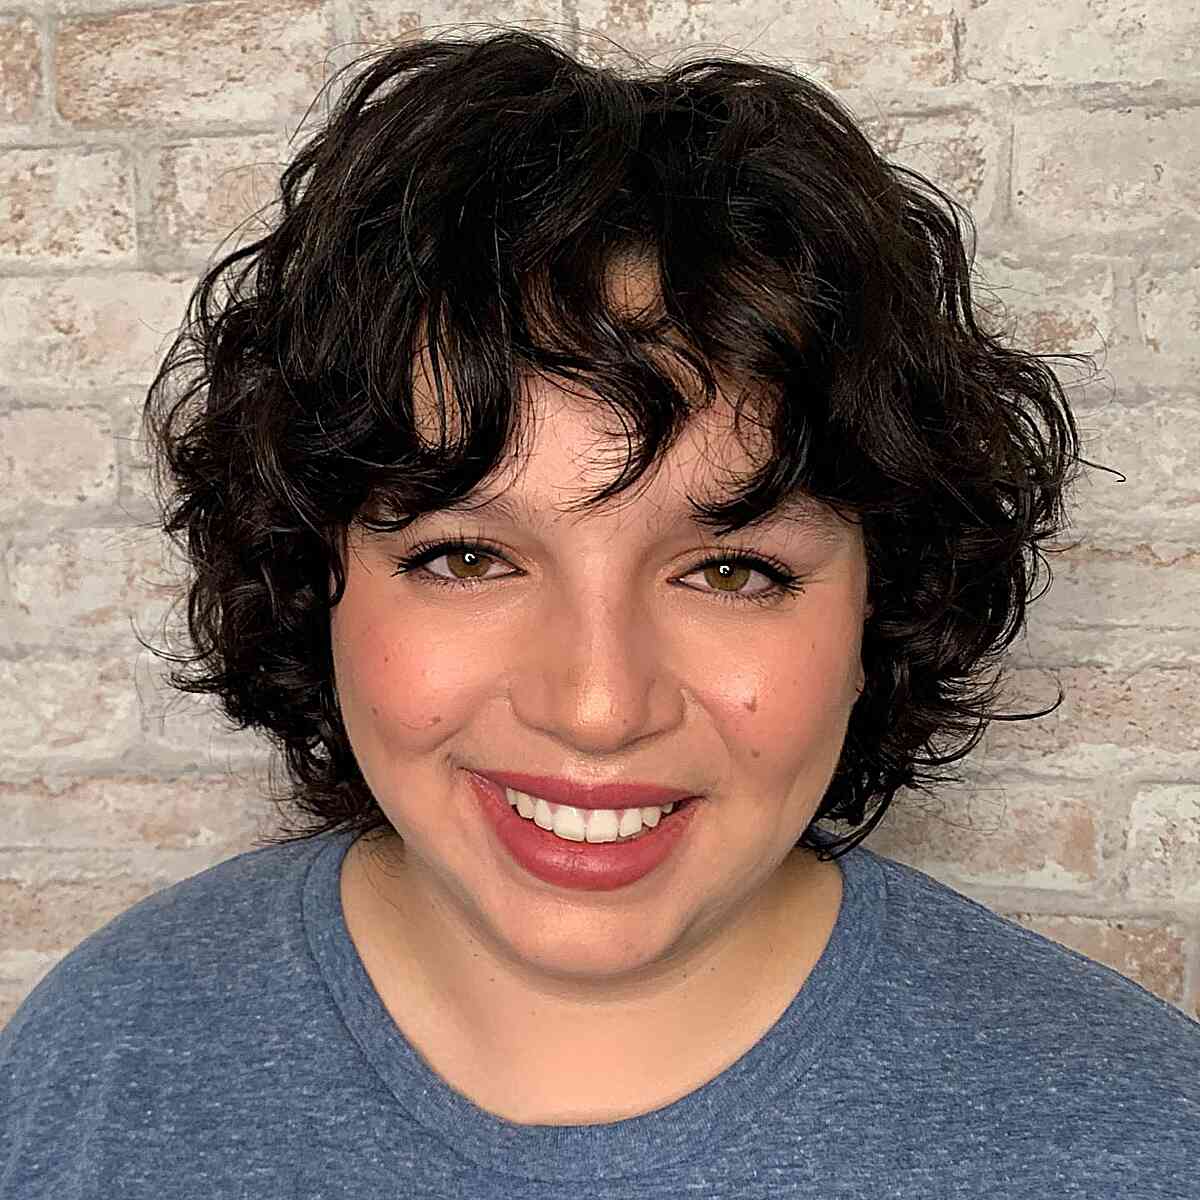 Deva Cut-Inspired Curly Short Hair for Round Face Shapes with choppy bangs